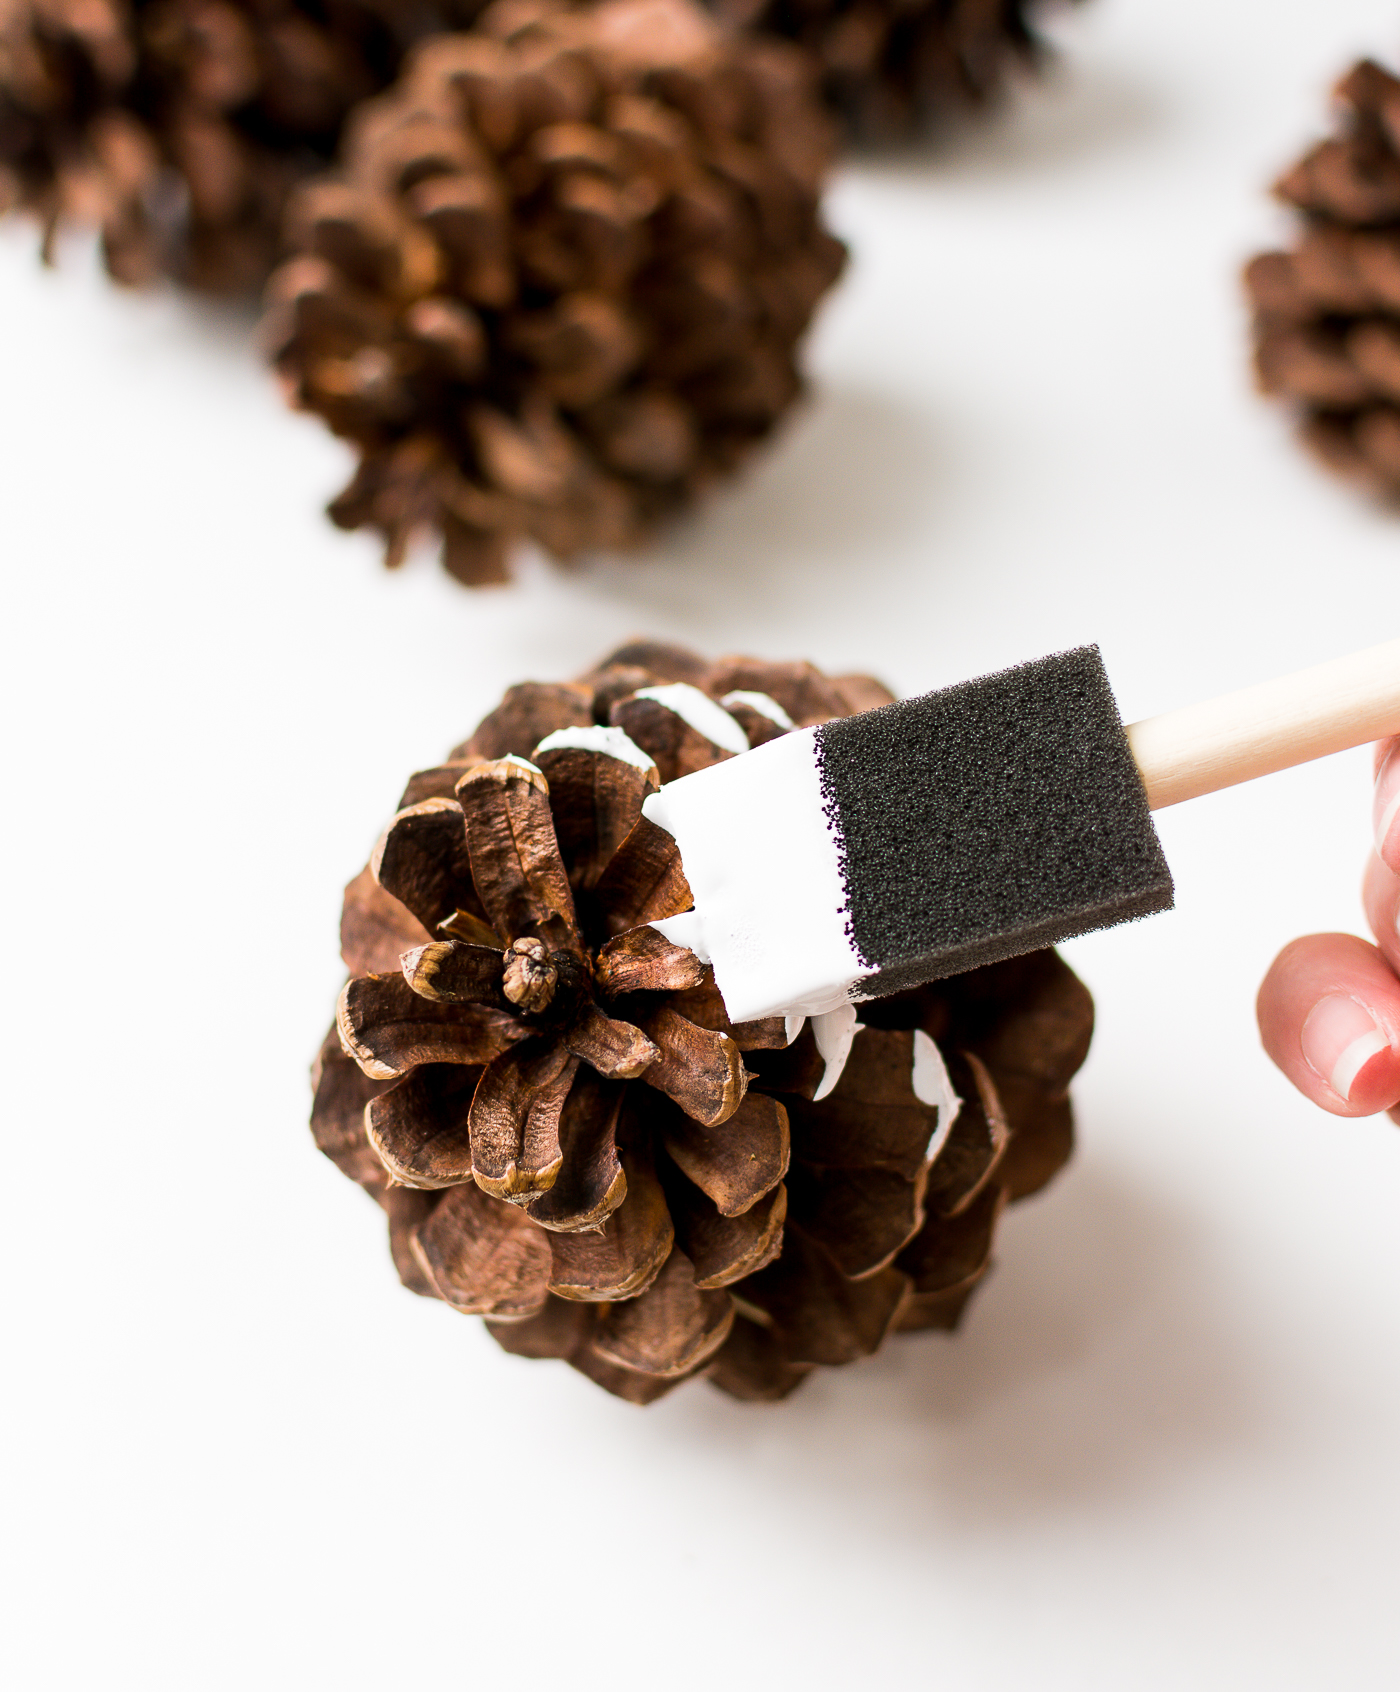 painted-pine-cones-how-to-paint-itallstartedwithpaint-com-3